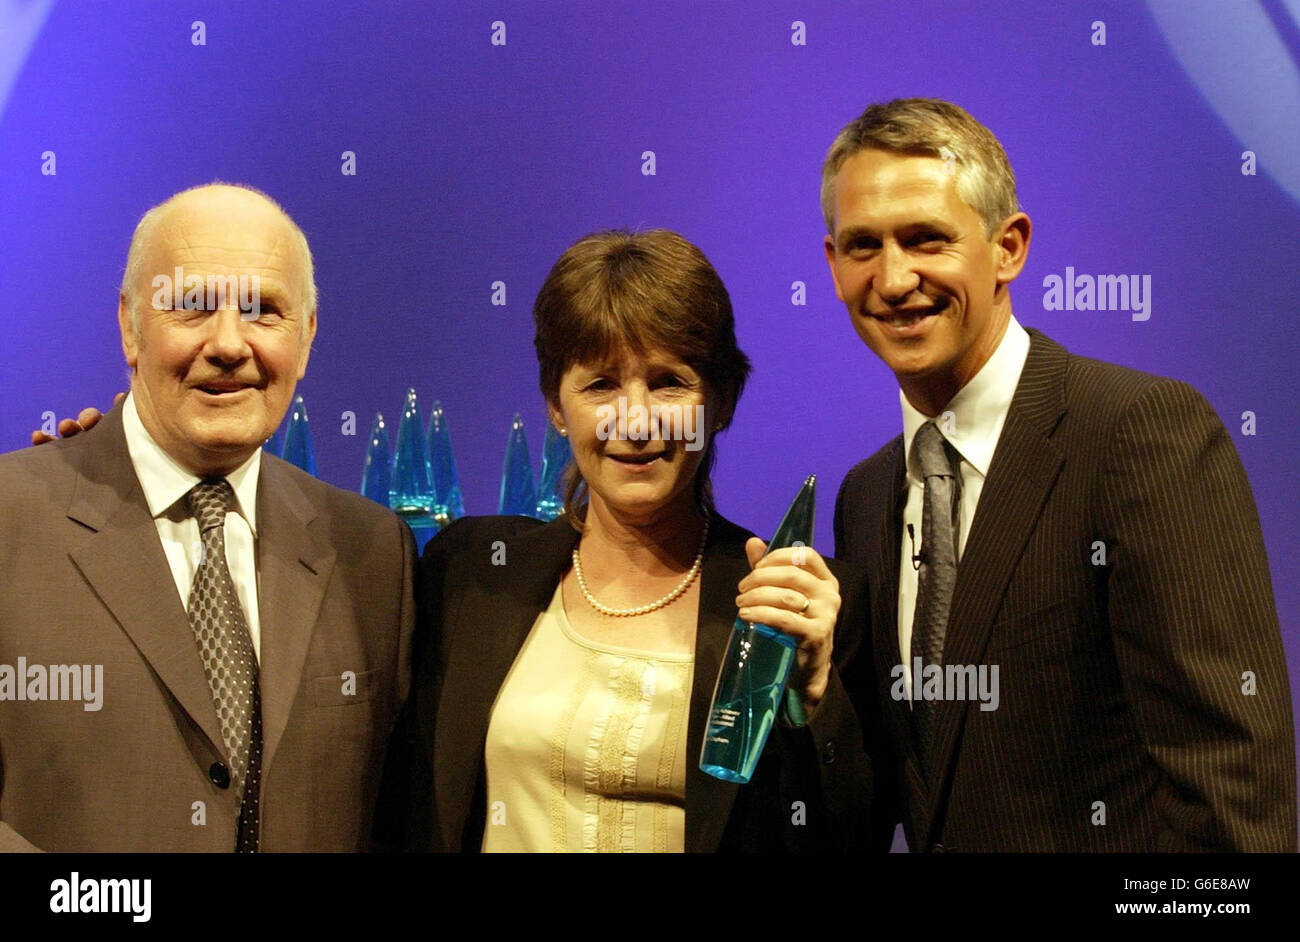 Lorraine Clapham, a Superintendent Physiotherapist from Southampton University Hospitals, receives the Outstanding Achiever Award for Allied Health Professionals, from the Secretary of State for Health, Dr John Reid, and Gary Lineker. * at the Health and Social Care Awards at Billingsgate Market, London, on Tuesday 1st July 2003. The awards recognise Health Care professionals who have pioneered new services for their patients. Stock Photo